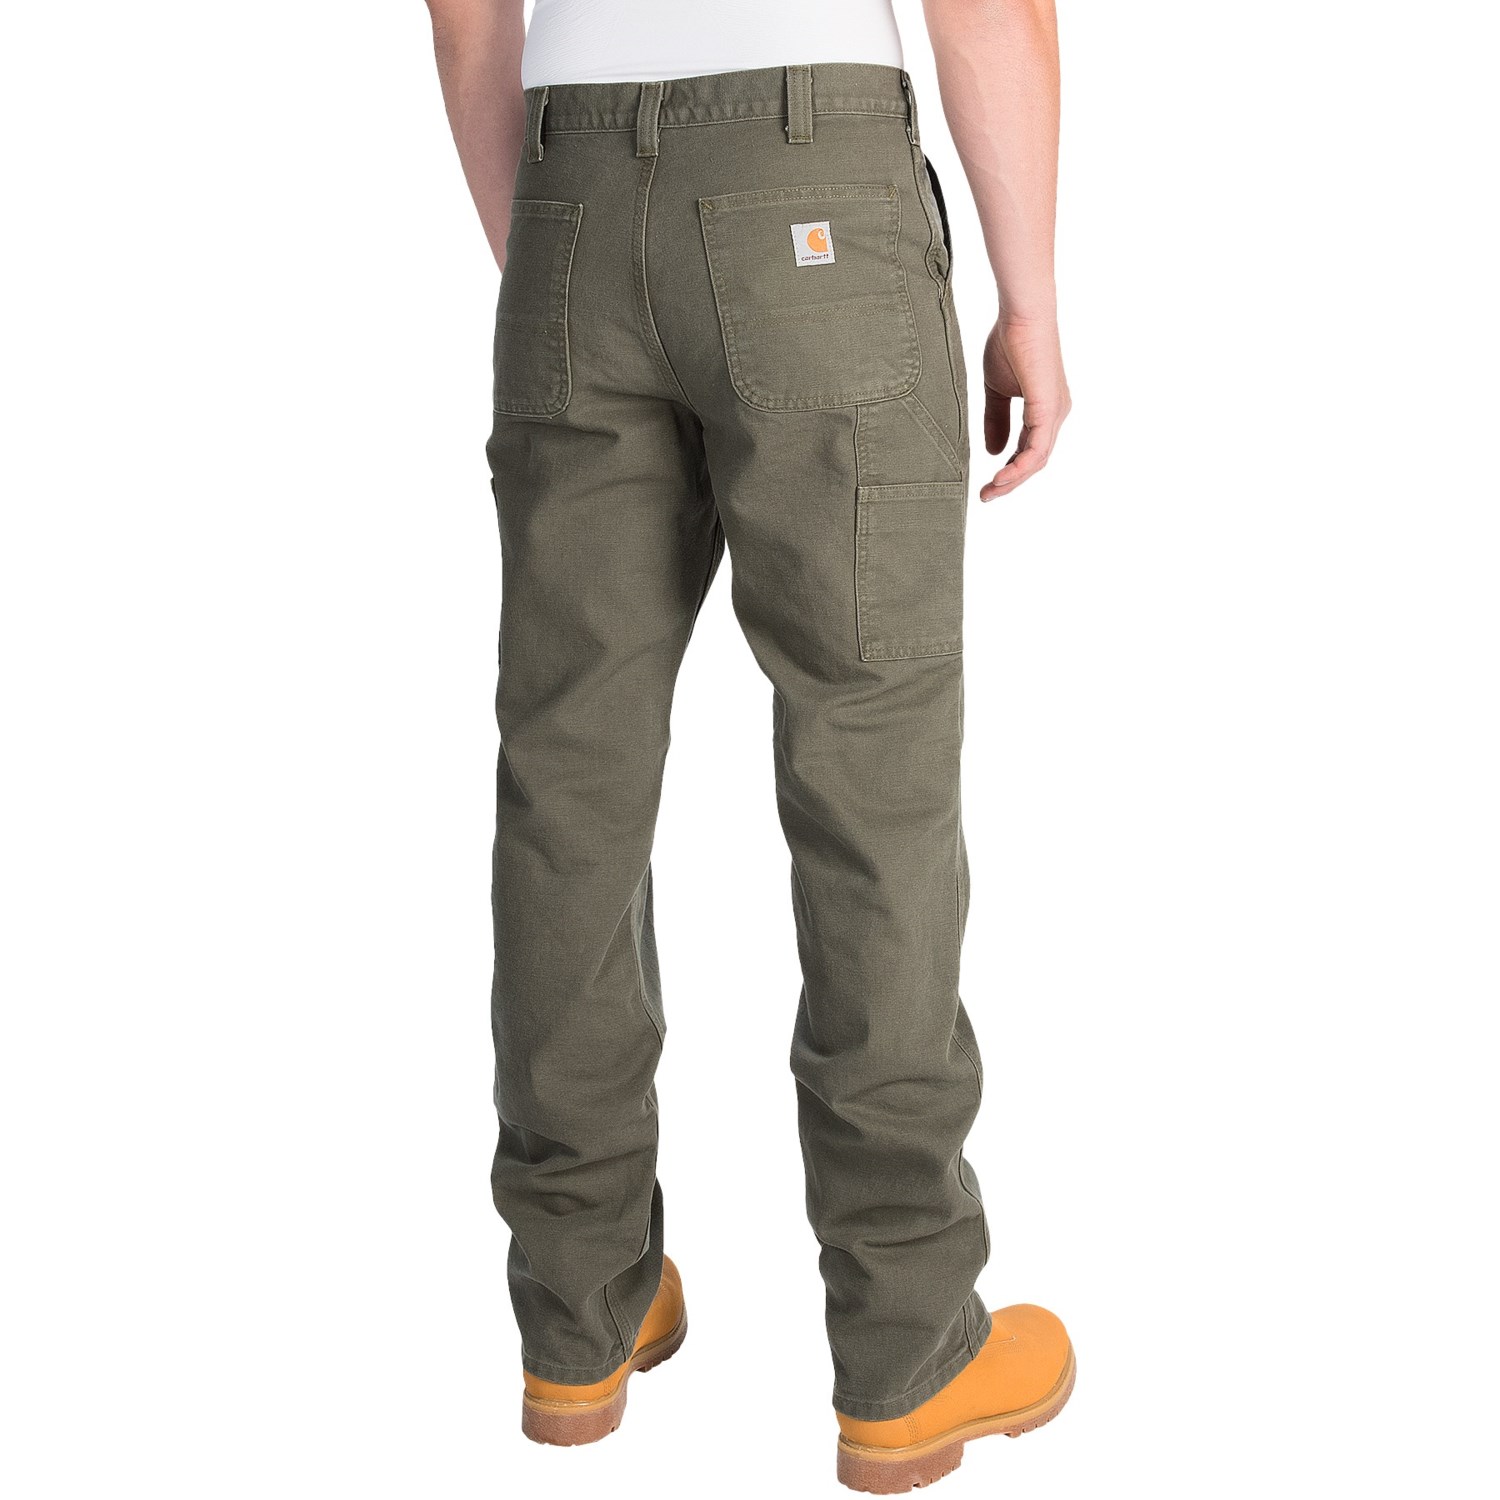 Carhartt Washed Duck Dungaree Pants (For Men)